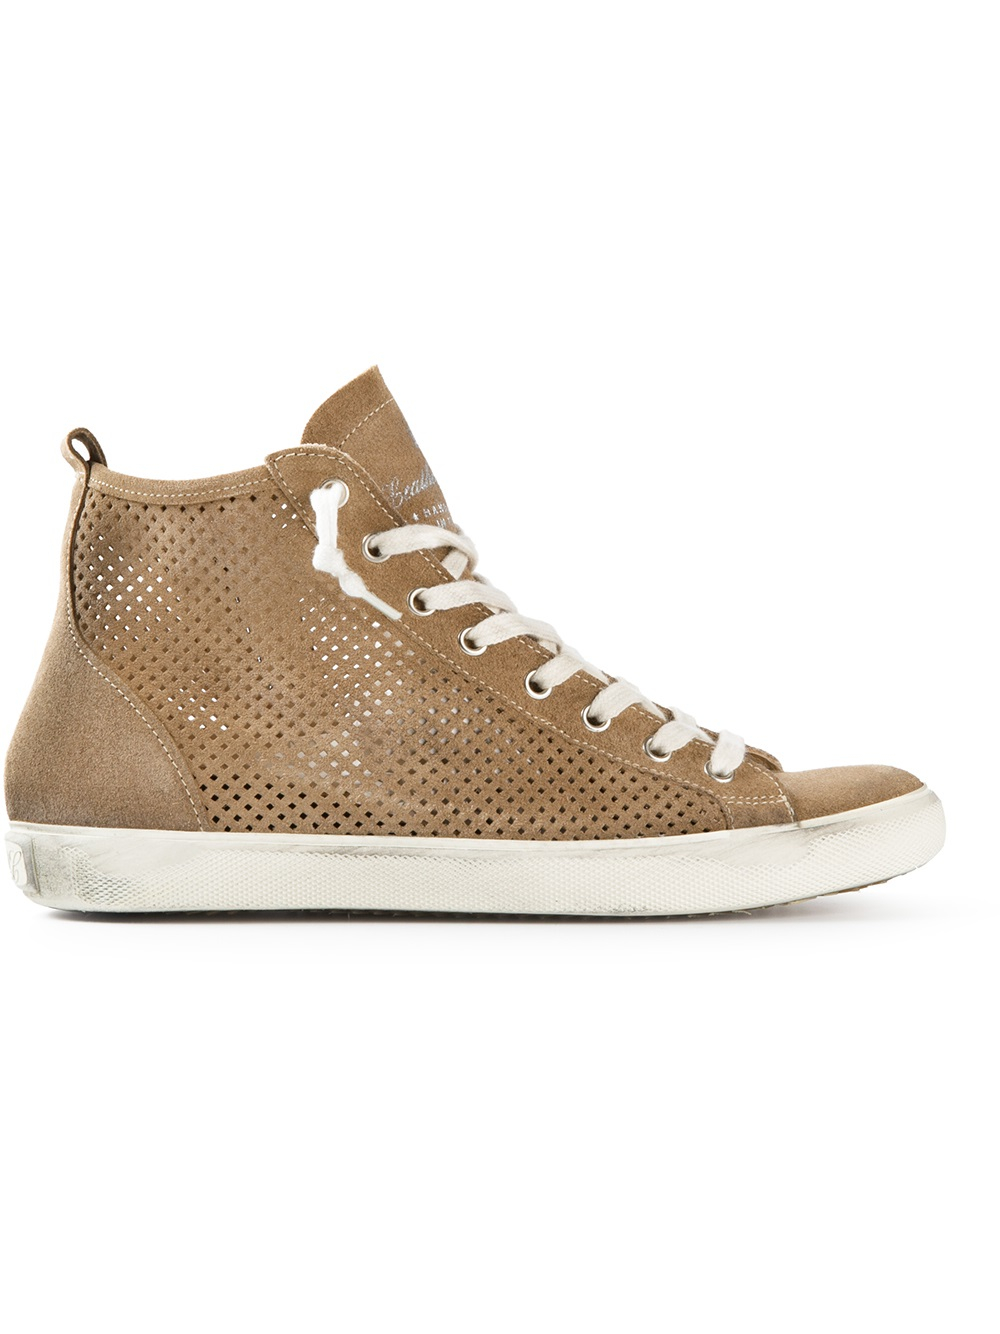 Lyst - Leather Crown Perforated Hitop Sneakers in Brown